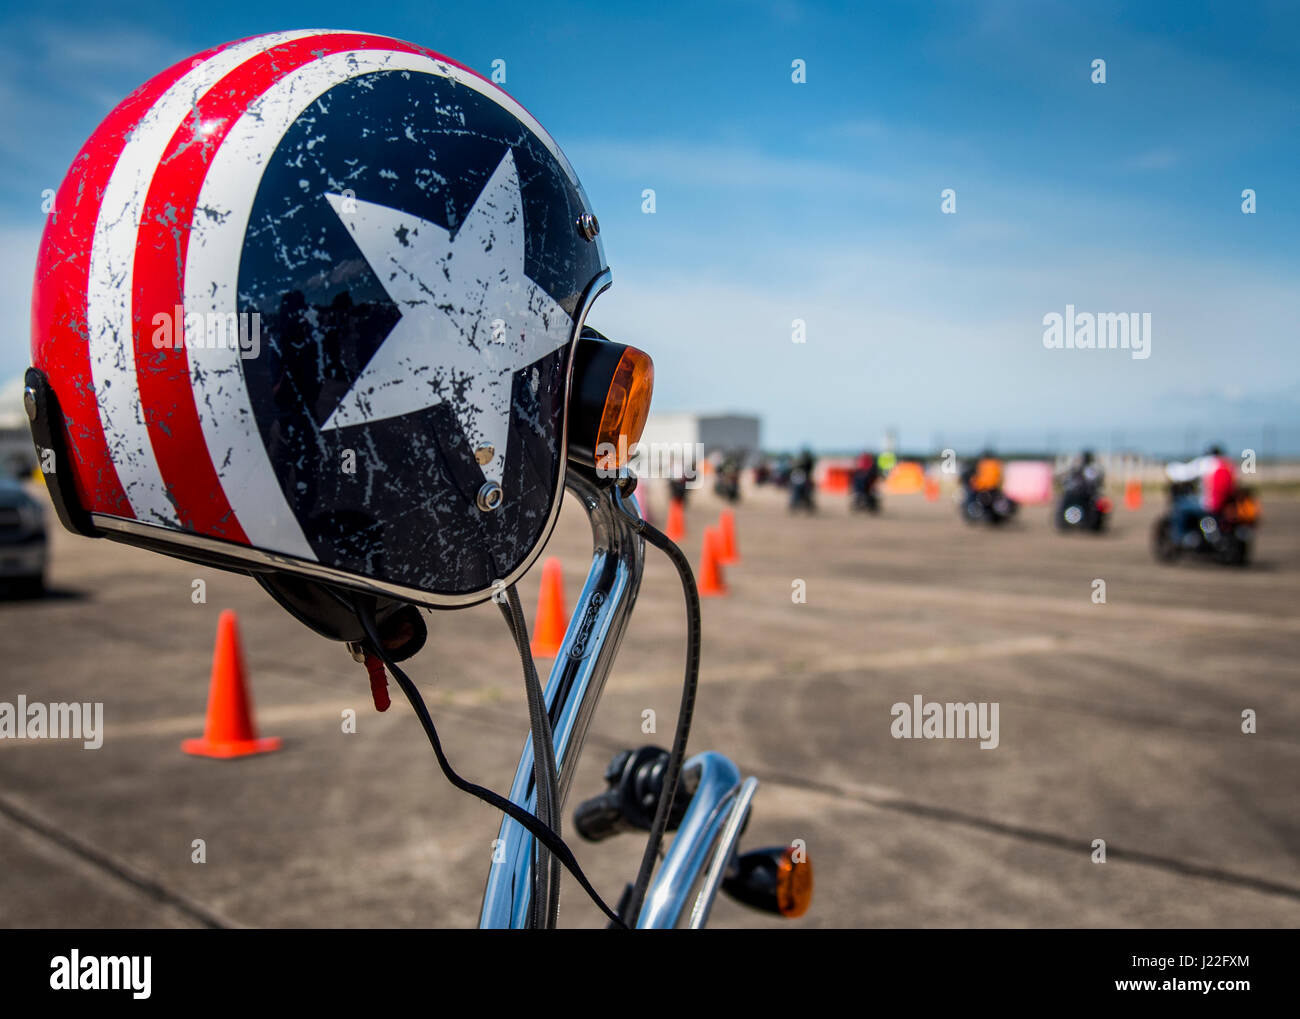 A bike and helmet wait for their rider as people roll out after the annual motorcycle safety rally at Eglin Air Force Base, Fla., April 14.  More than 500 motorcyclists came out for the event that meets the annual safety briefing requirement for base riders.  (U.S. Air Force photo/Samuel King Jr.) Stock Photo